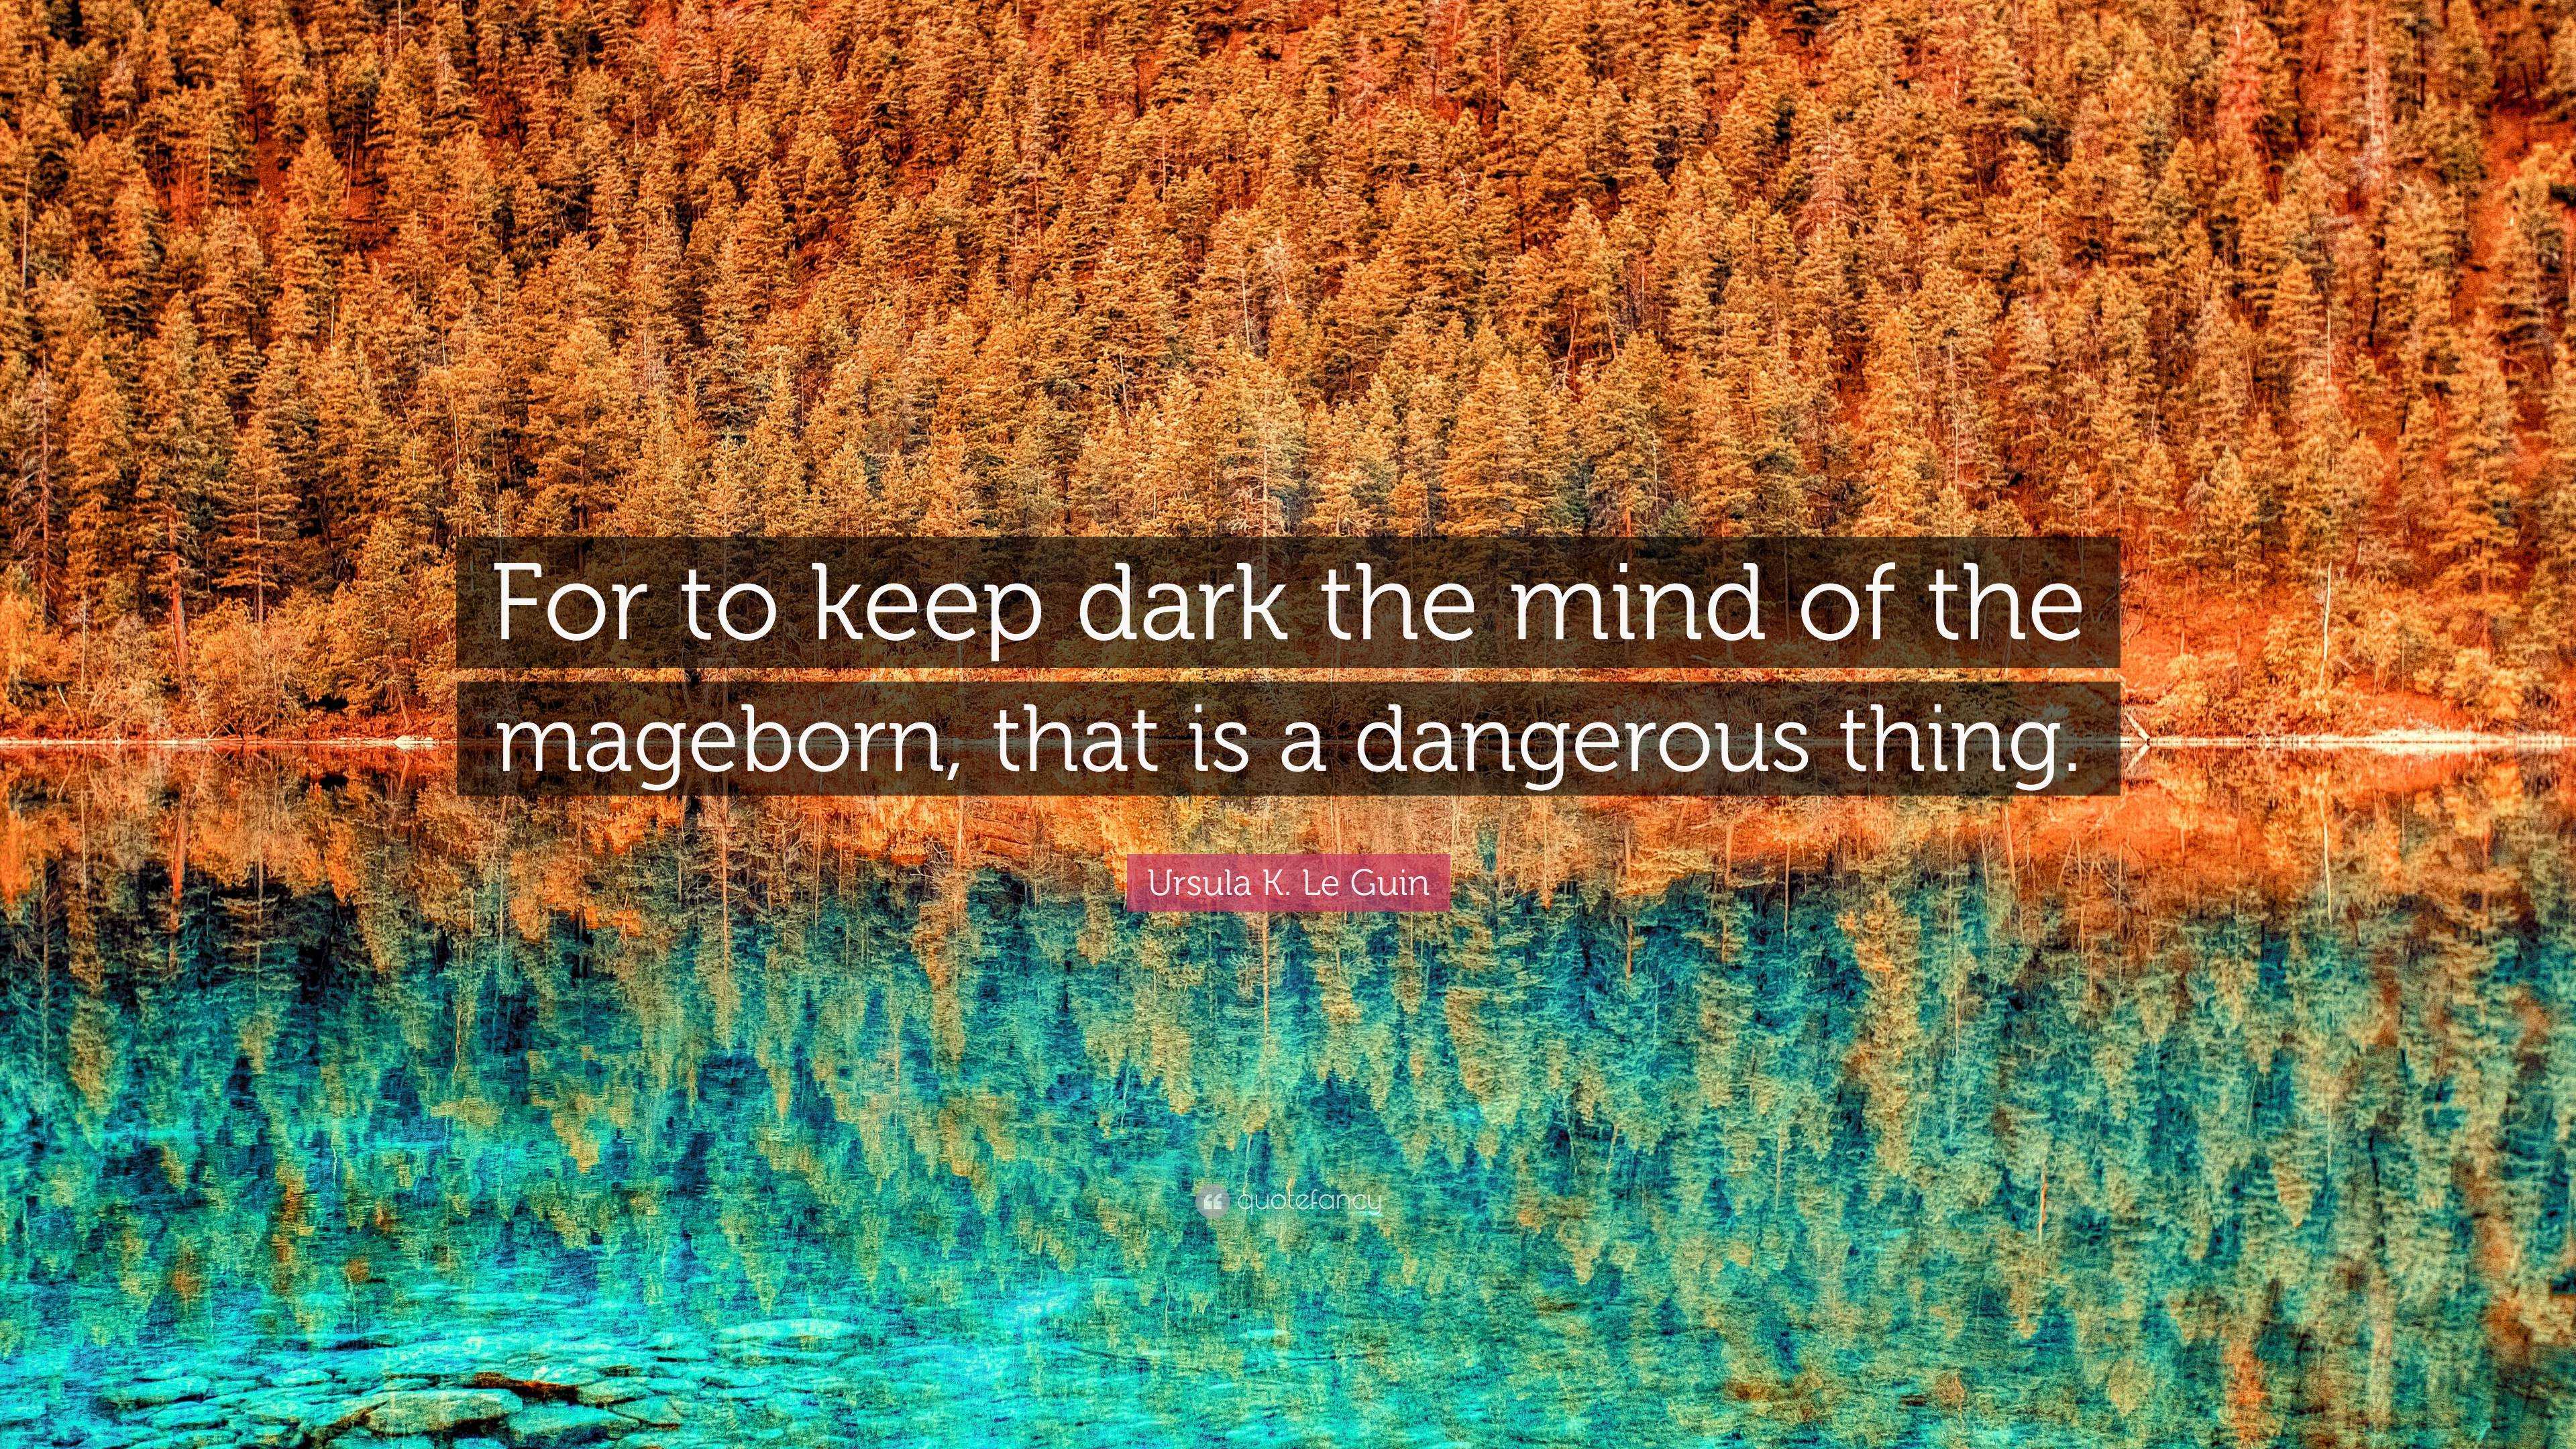 Ursula K Le Guin Quote For To Keep Dark The Mind Of The Mageborn That Is A Dangerous Thing 2 Wallpapers Quotefancy